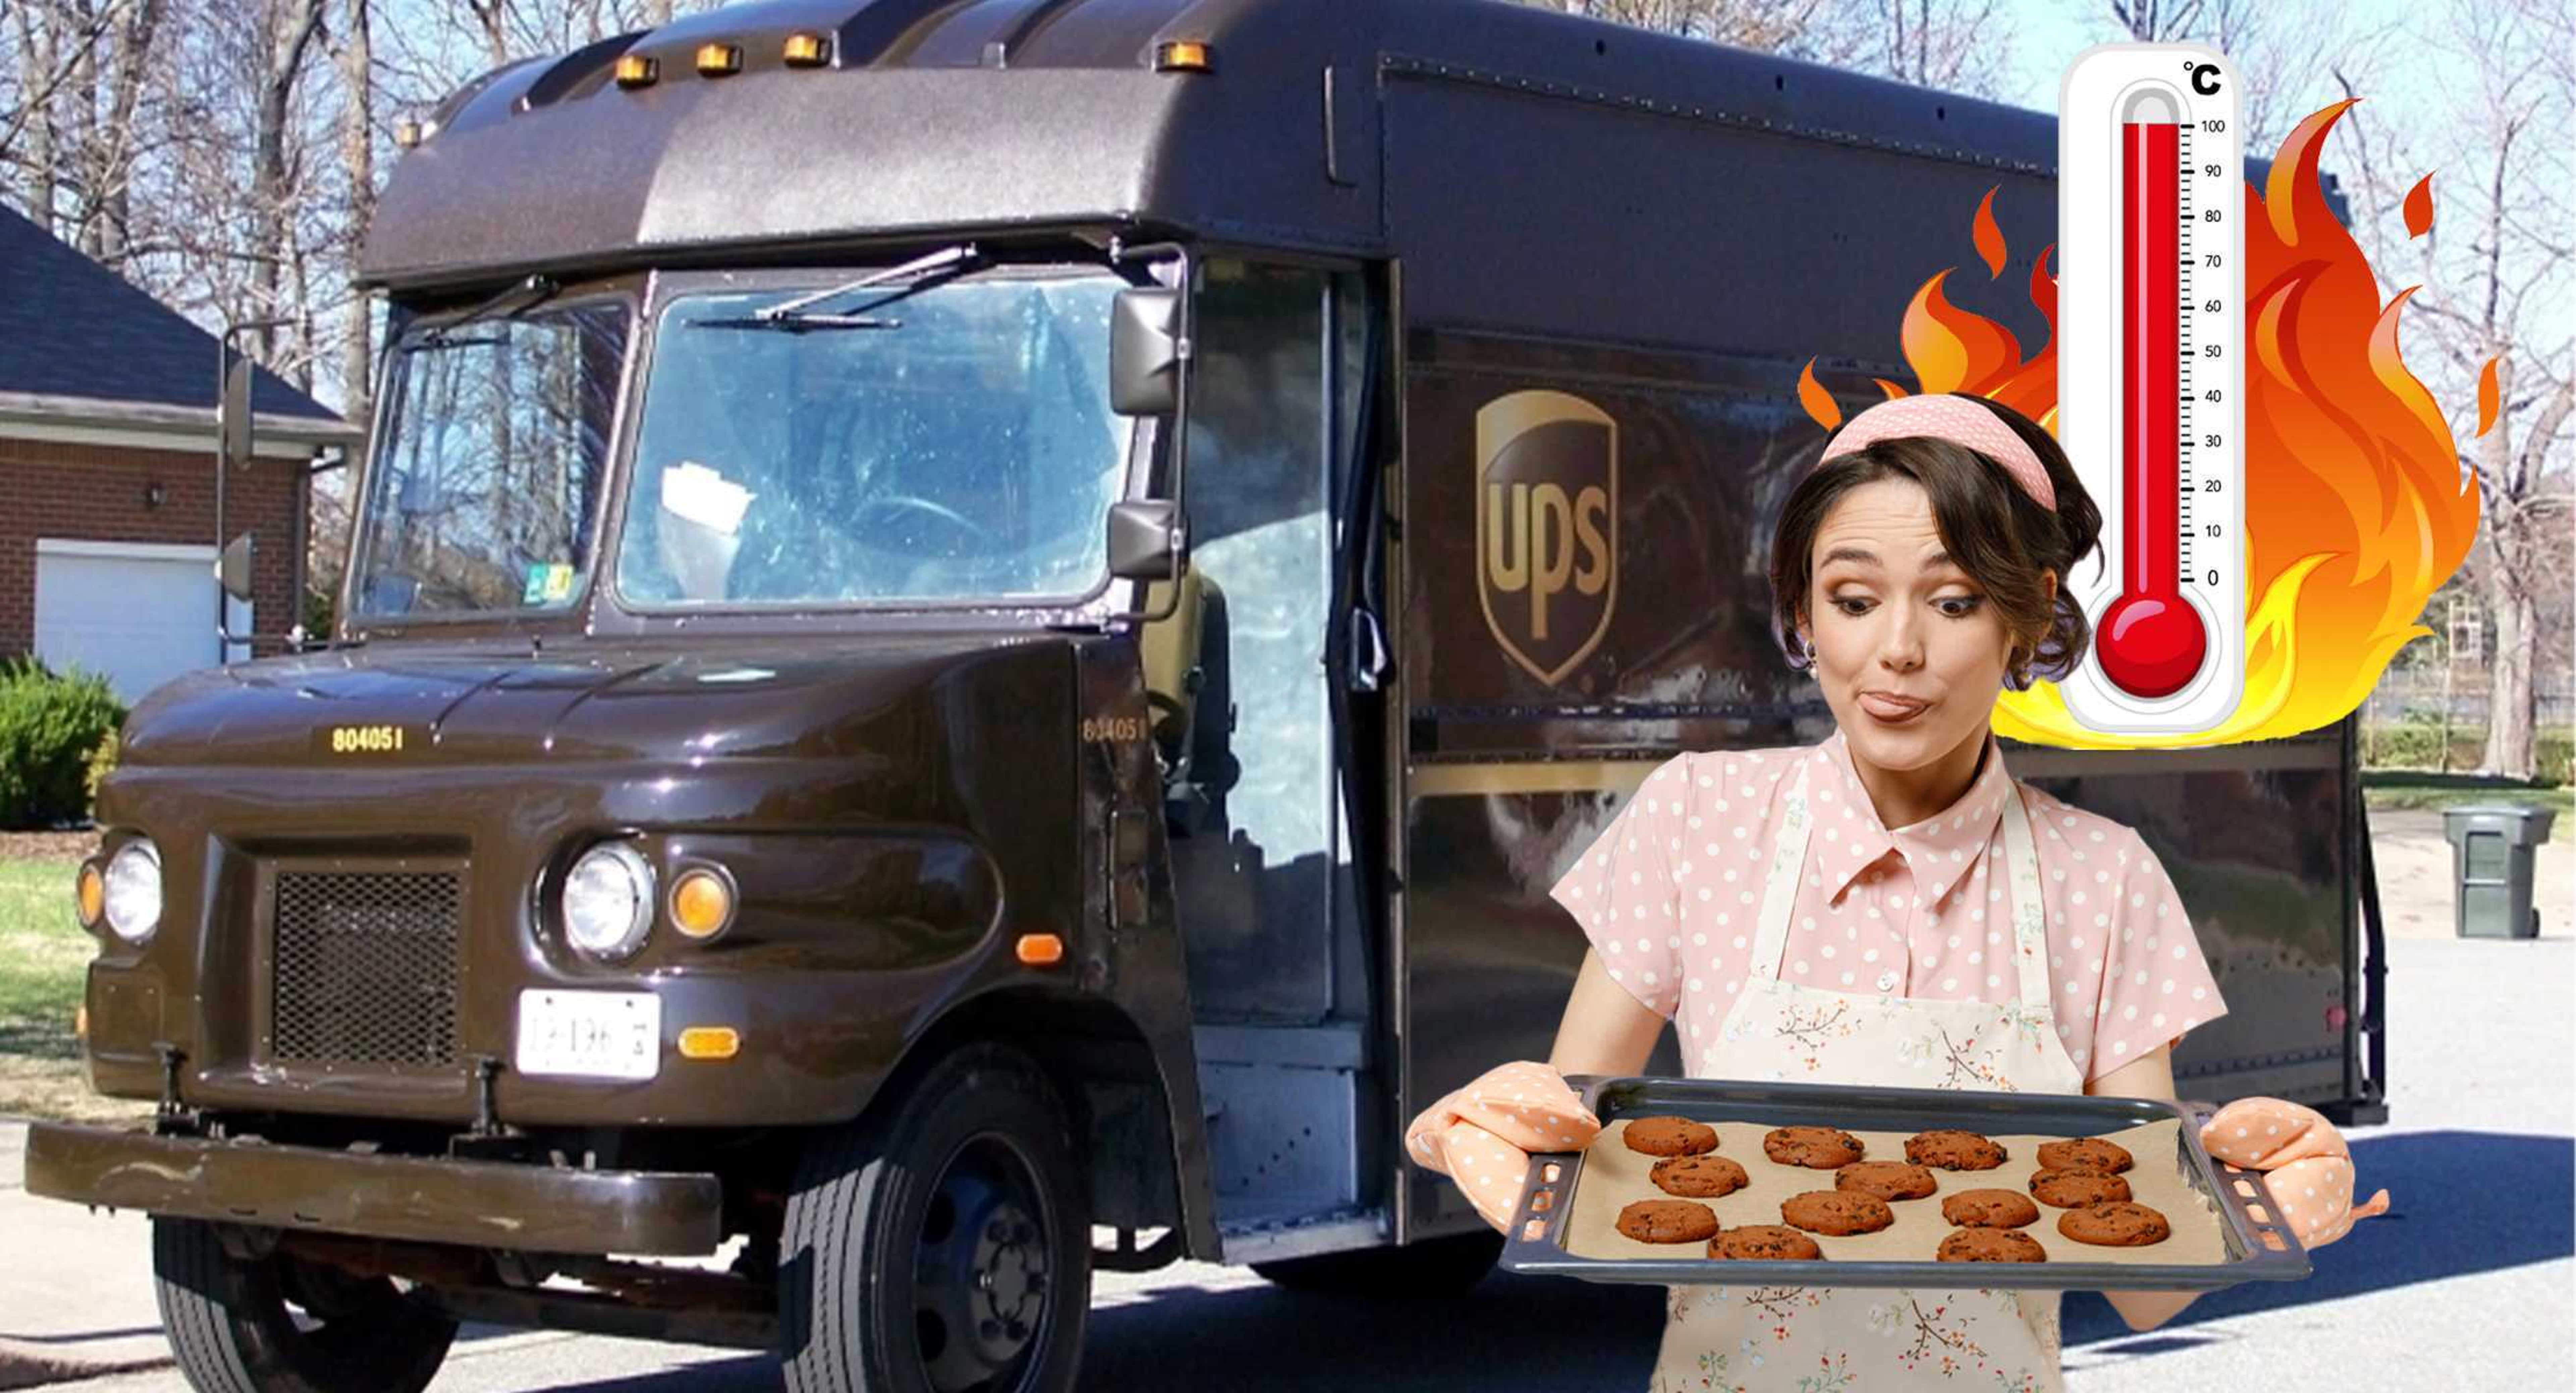 &#39;You Can Feel Yourself Baking&#39;: UPS Drivers Simmering In 150 degree Trucks, Can Bake Cookies On Dashboards